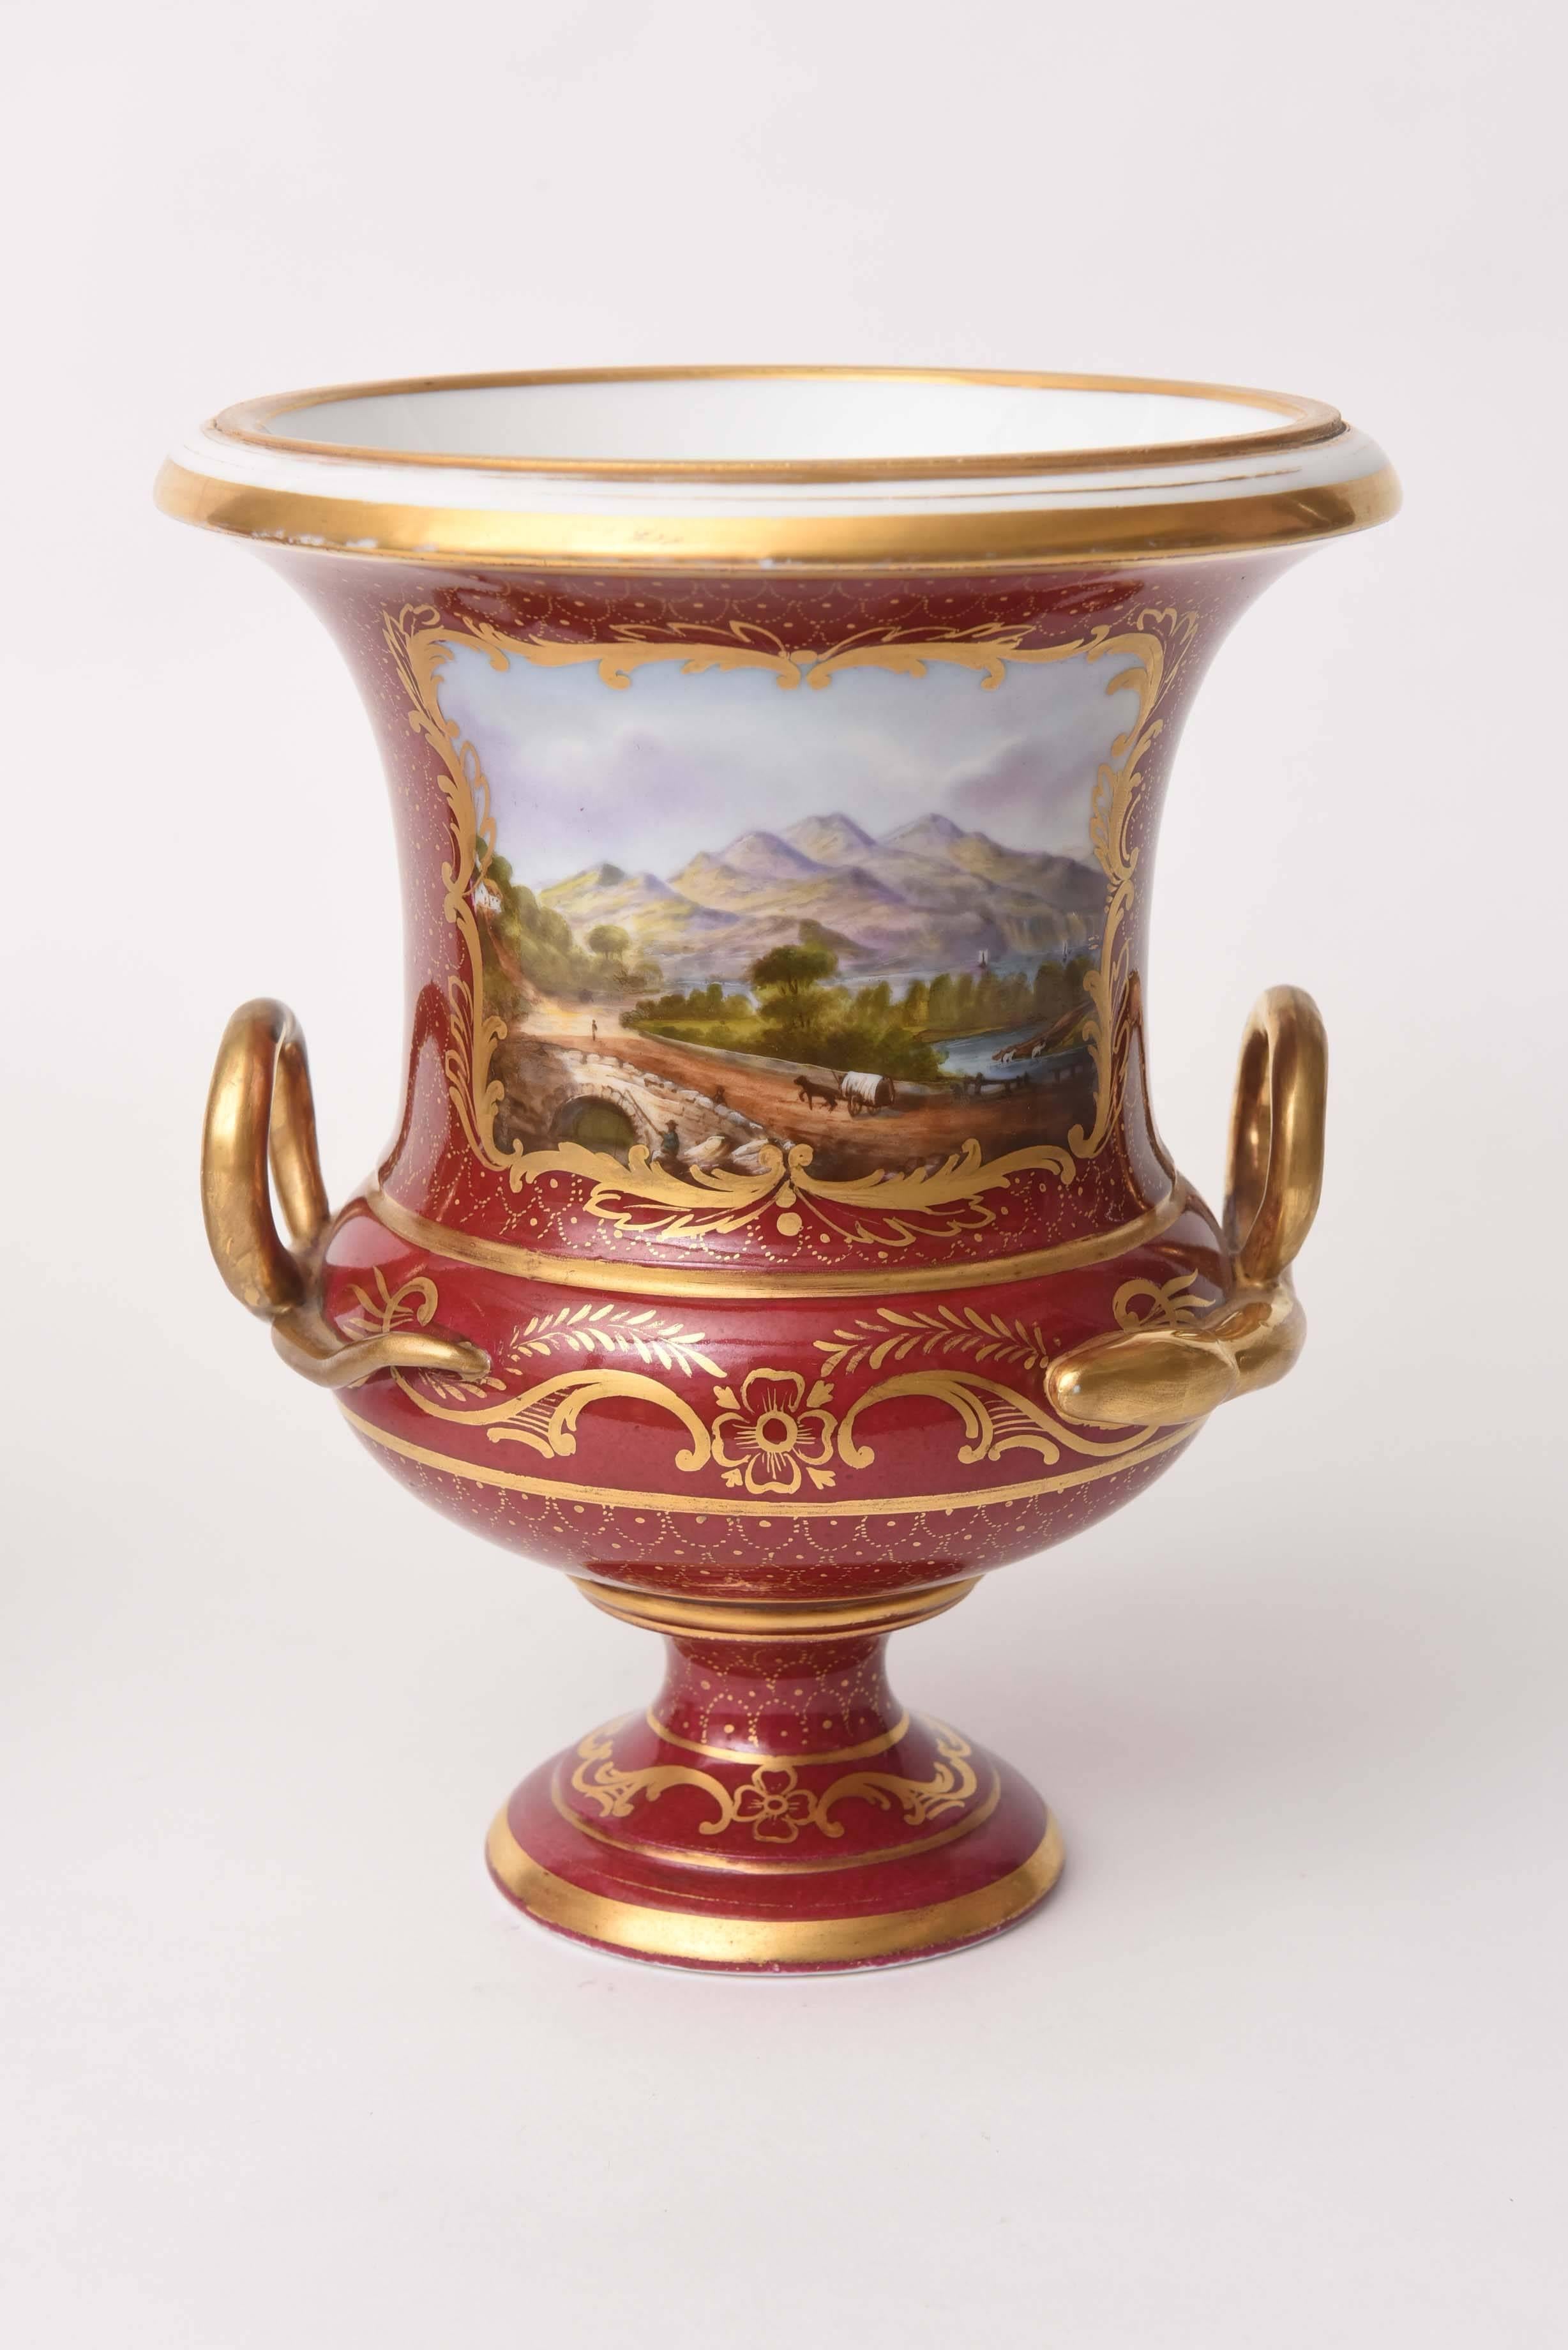 From Royal Crown Derby, one of our favorite English porcelain firms we have this impressive set of two matched urn vases on a nicely shaped pedestal base. Beautiful gilded loop handles and an all-over gilt foliate decoration on a ruby or claret